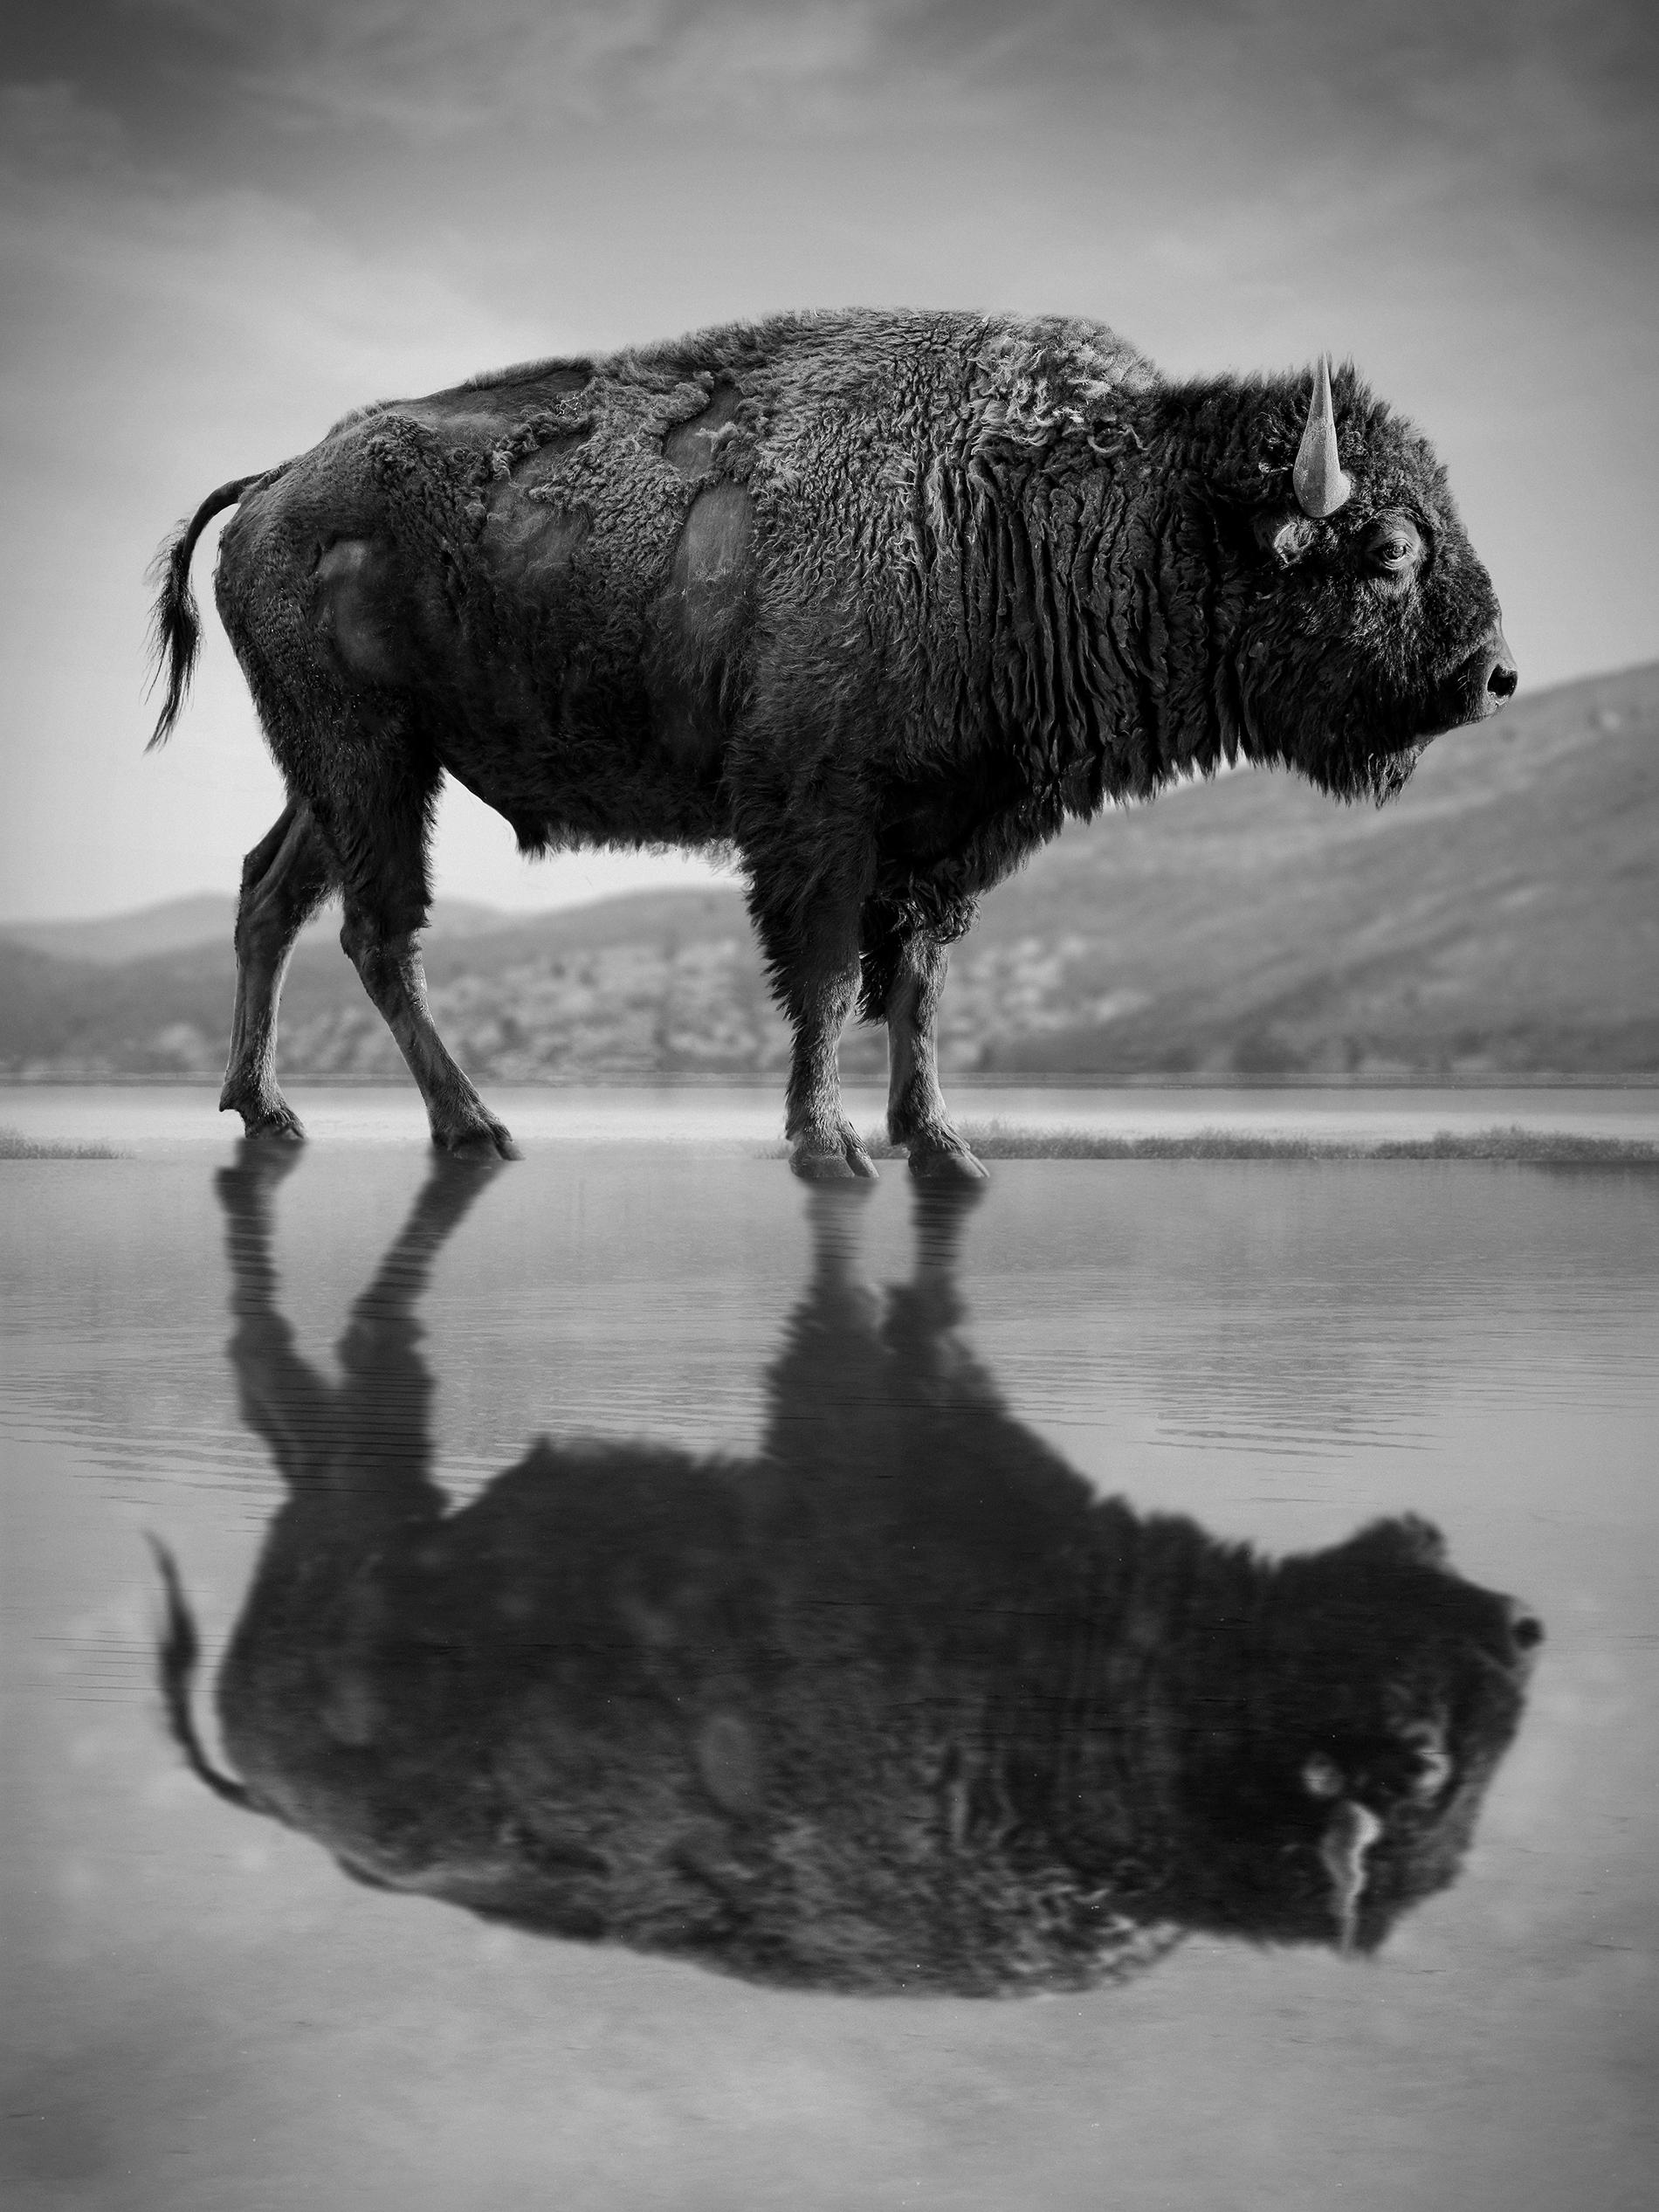 "Old World" Black & White Bison Photography 48x36 Buffalo Signed Photograph